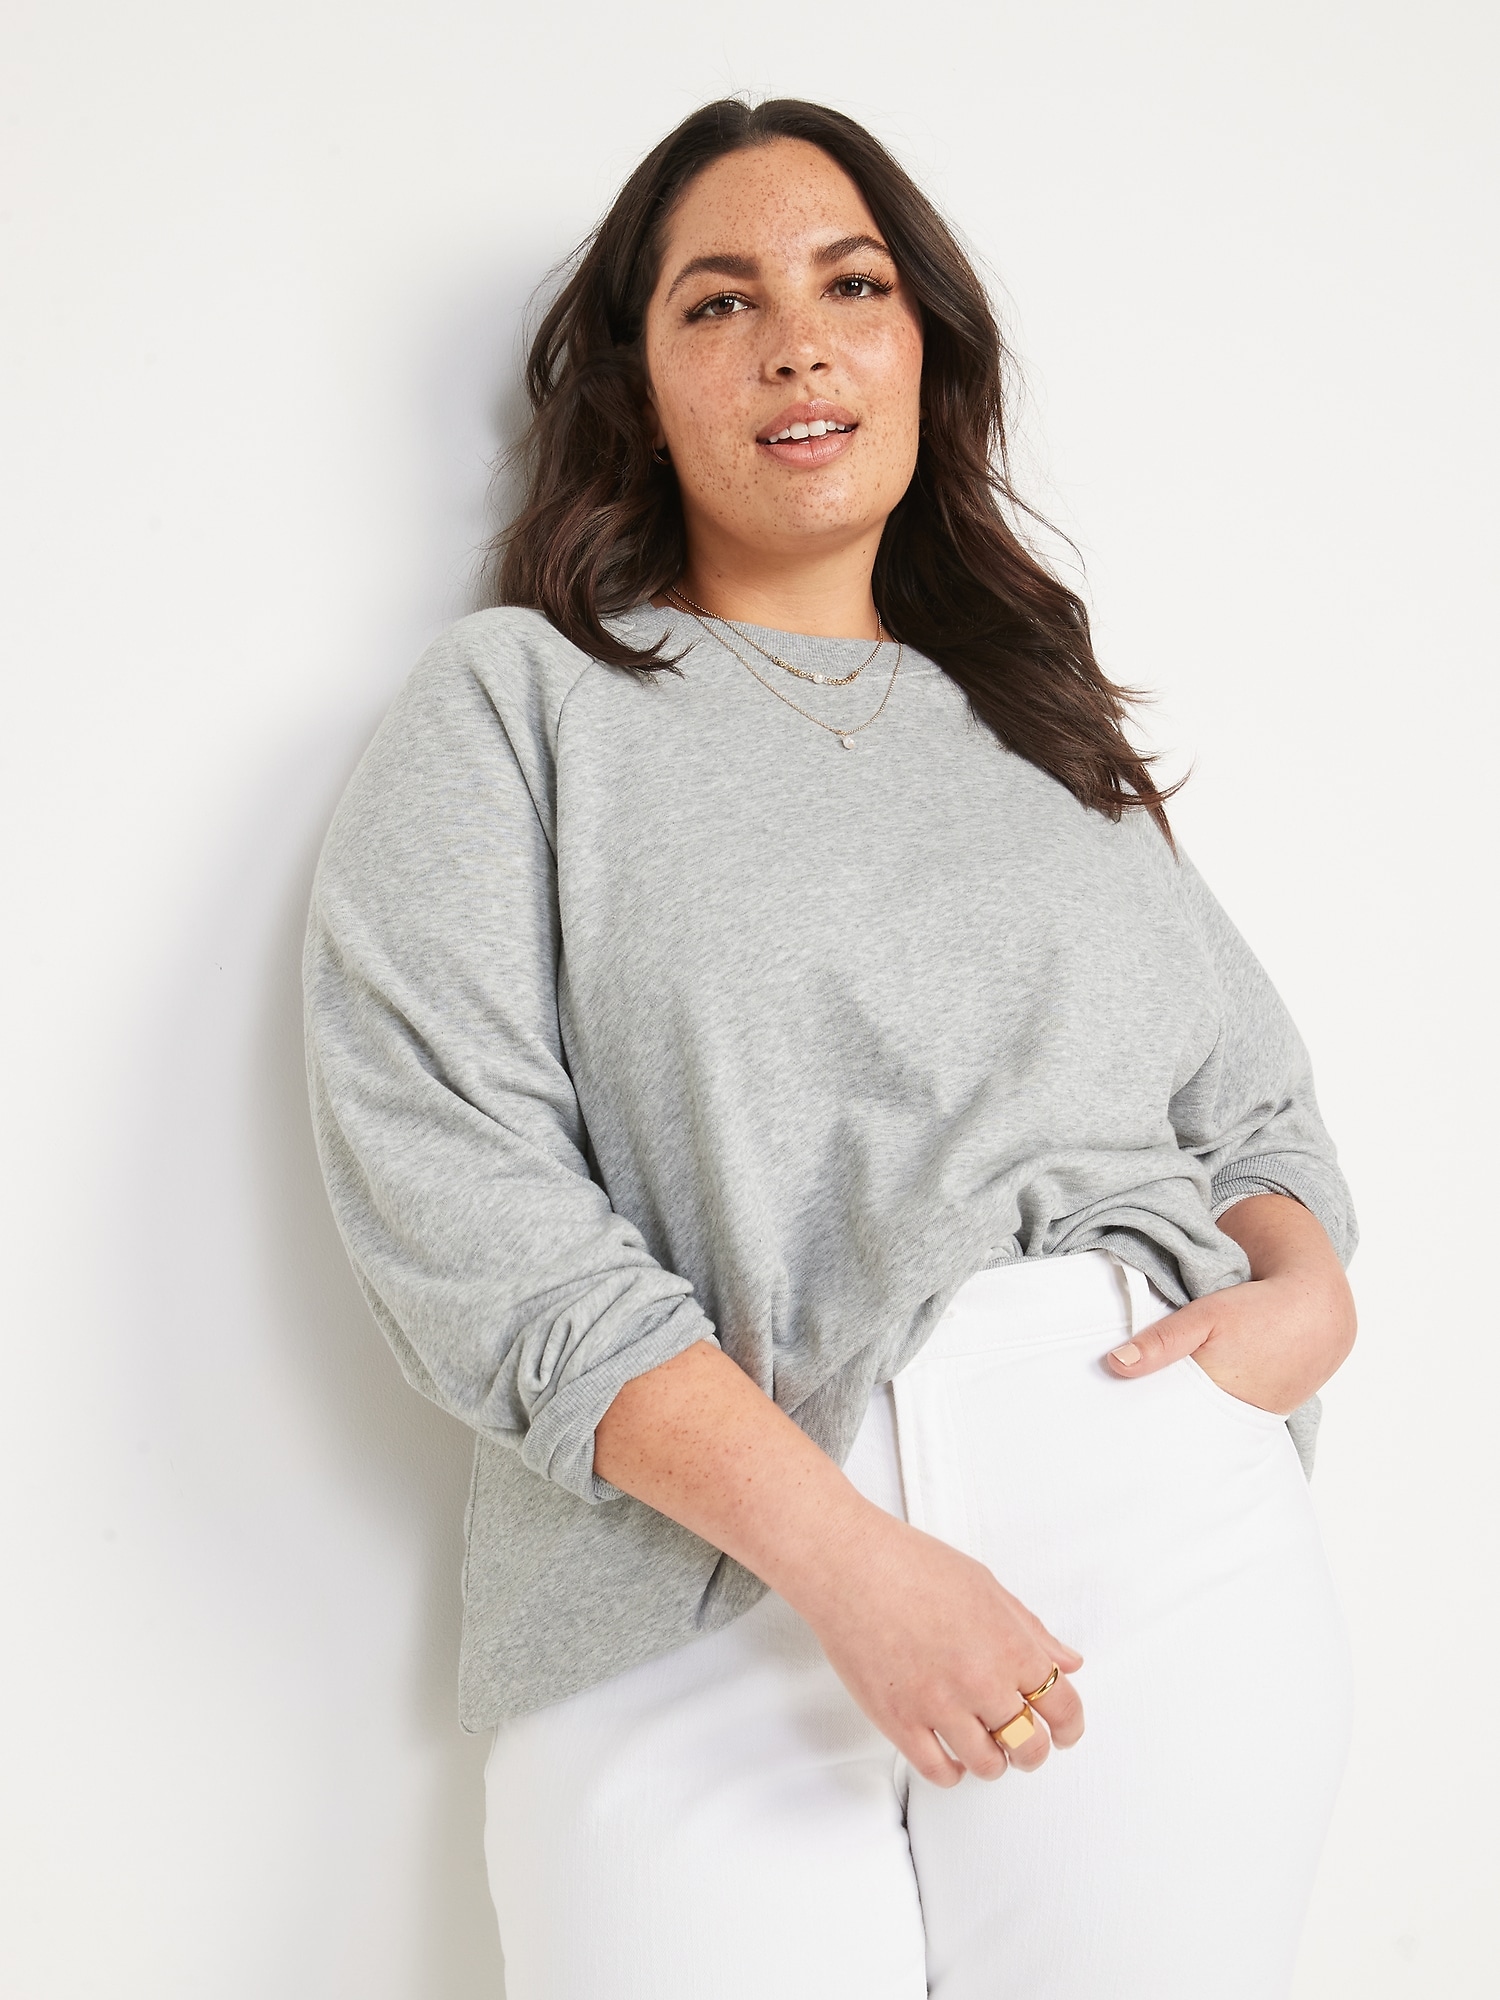 Oversized French Tunic Old Navy Women | Terry for Sweatshirt